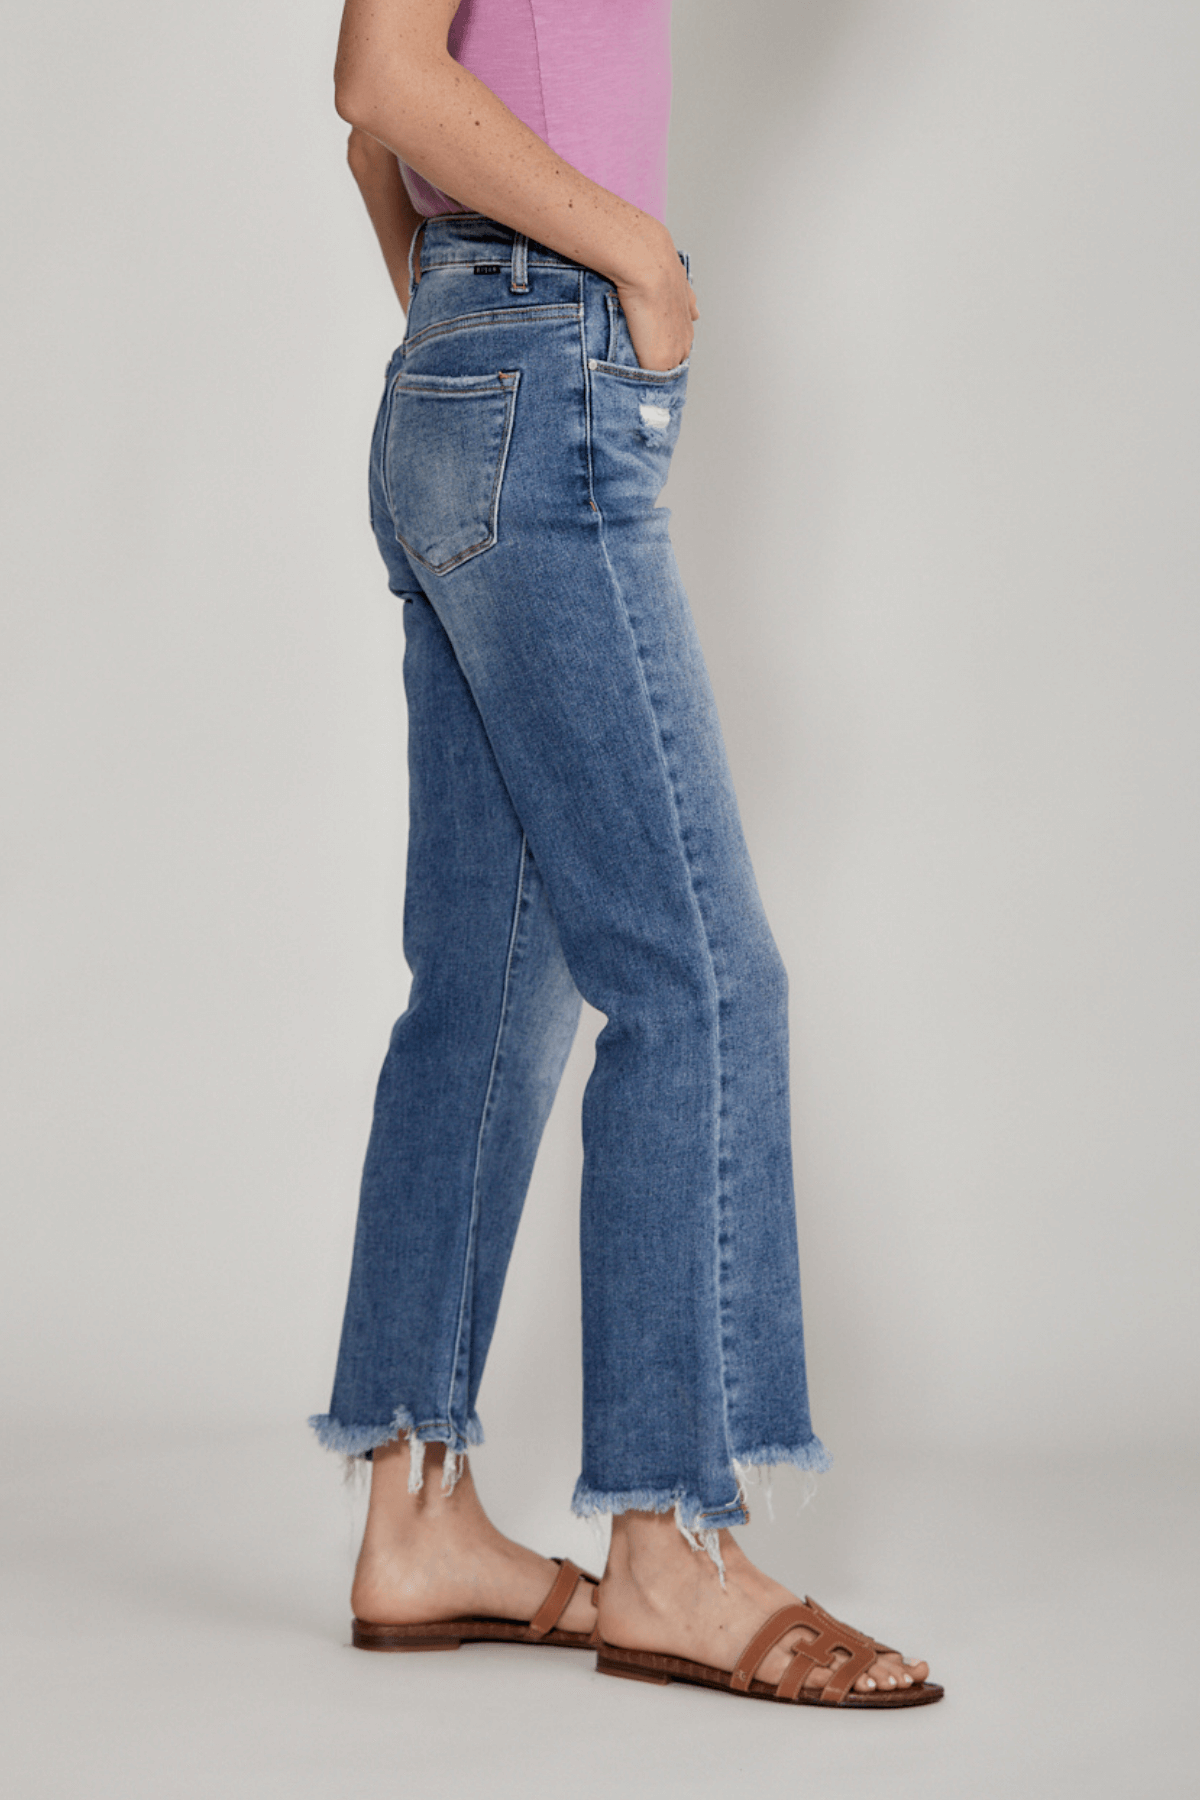 Risen Paige High Rise Distressed Kick Flare Jeans